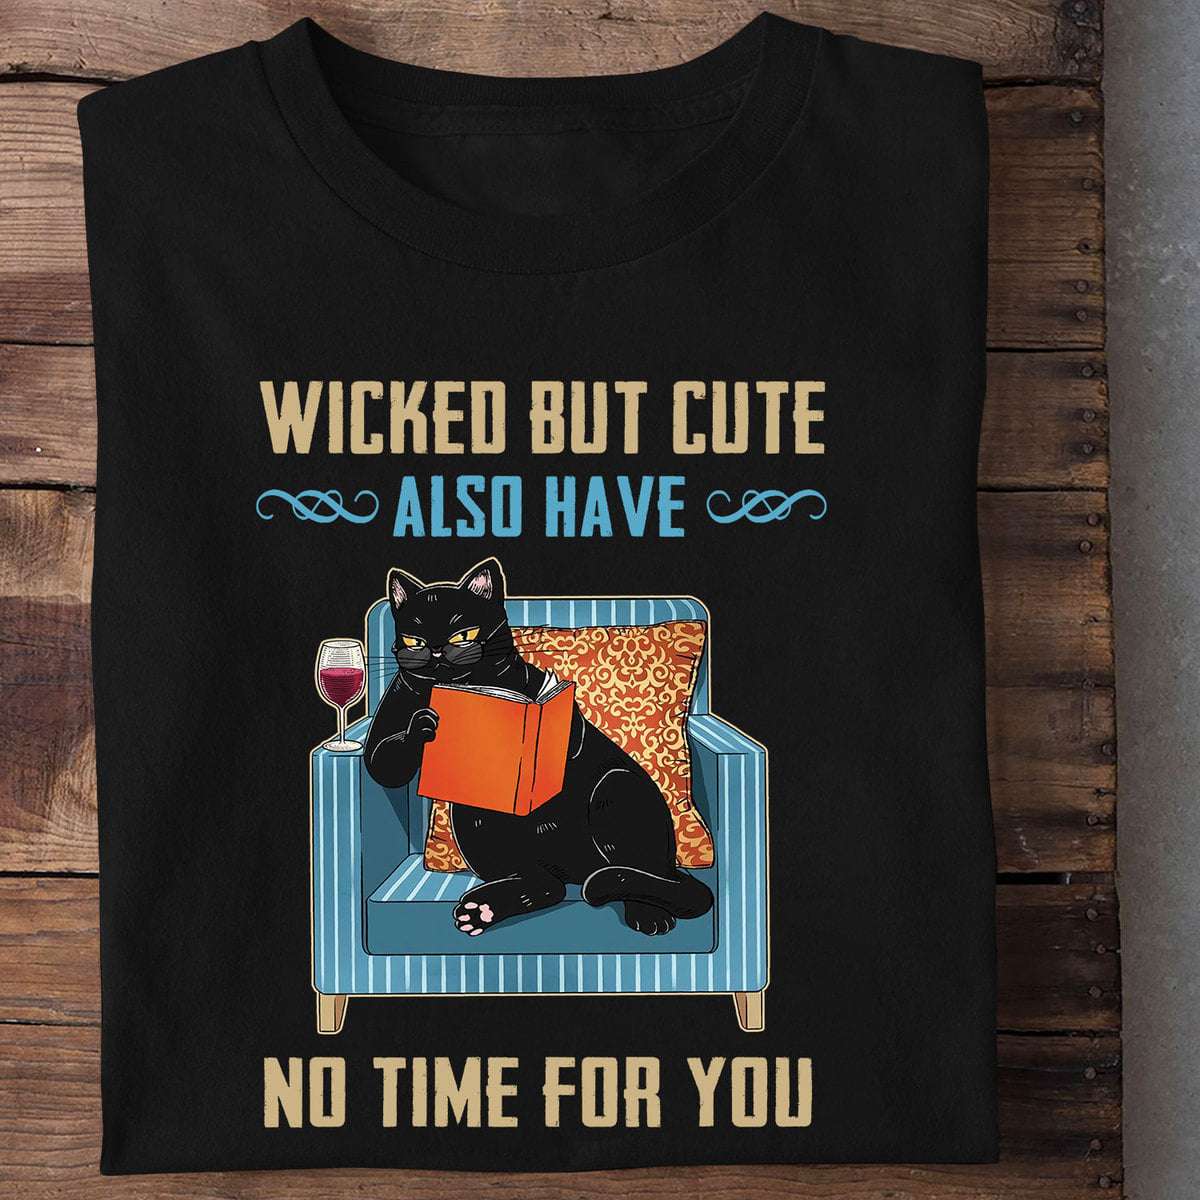 Wicked but cute also have no time for you - Time to read books, cat and wine